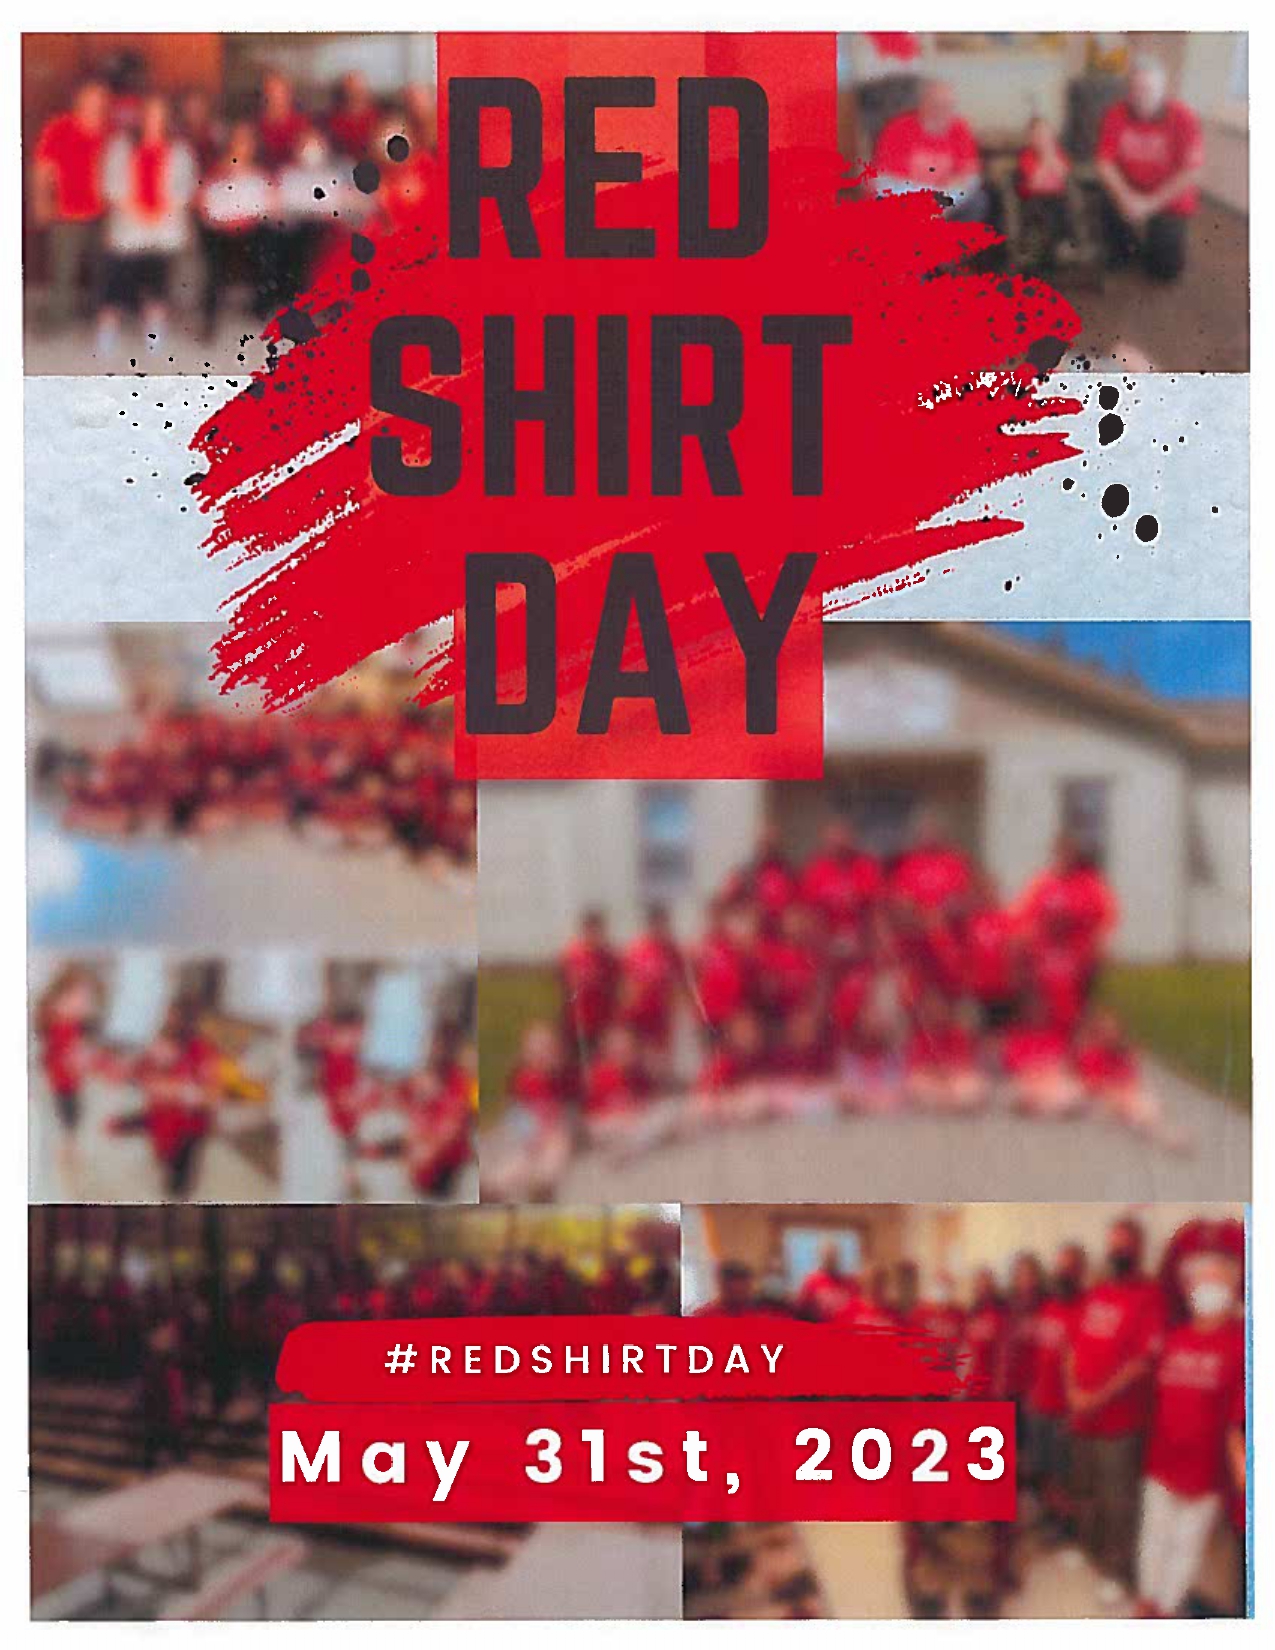 RED SHIRT DAY